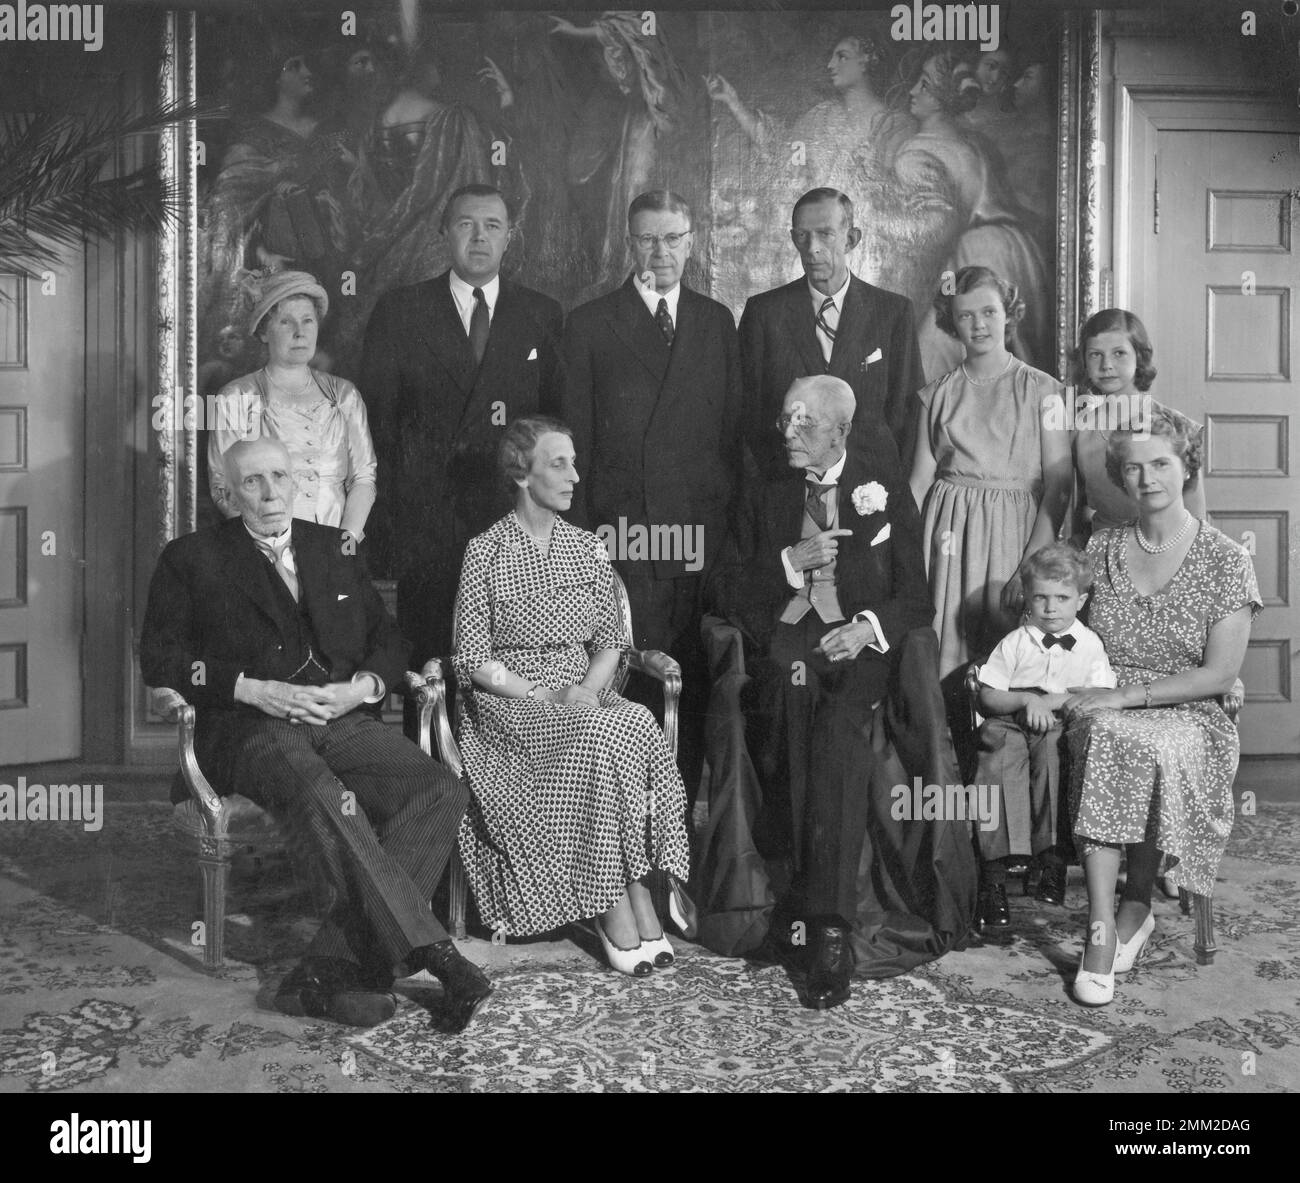 Carl XVI Gustaf, King of Sweden. Born 30 april 1946. King Carl XVI Gustaf as a child. King Gustaf the V, 1858-1950, in the middle. From left top row: Countess Maria Bernadotte, Prince Bertil, Crown Prince Gustaf Adolf, Prince Wilhelm, Princess Margaretha, Princess Birgitta Seated from left: Prince Oscar, Queen Louise, Gustaf the V, Prince Carl Gustaf, Princess Sibylla. 1950 Stock Photo